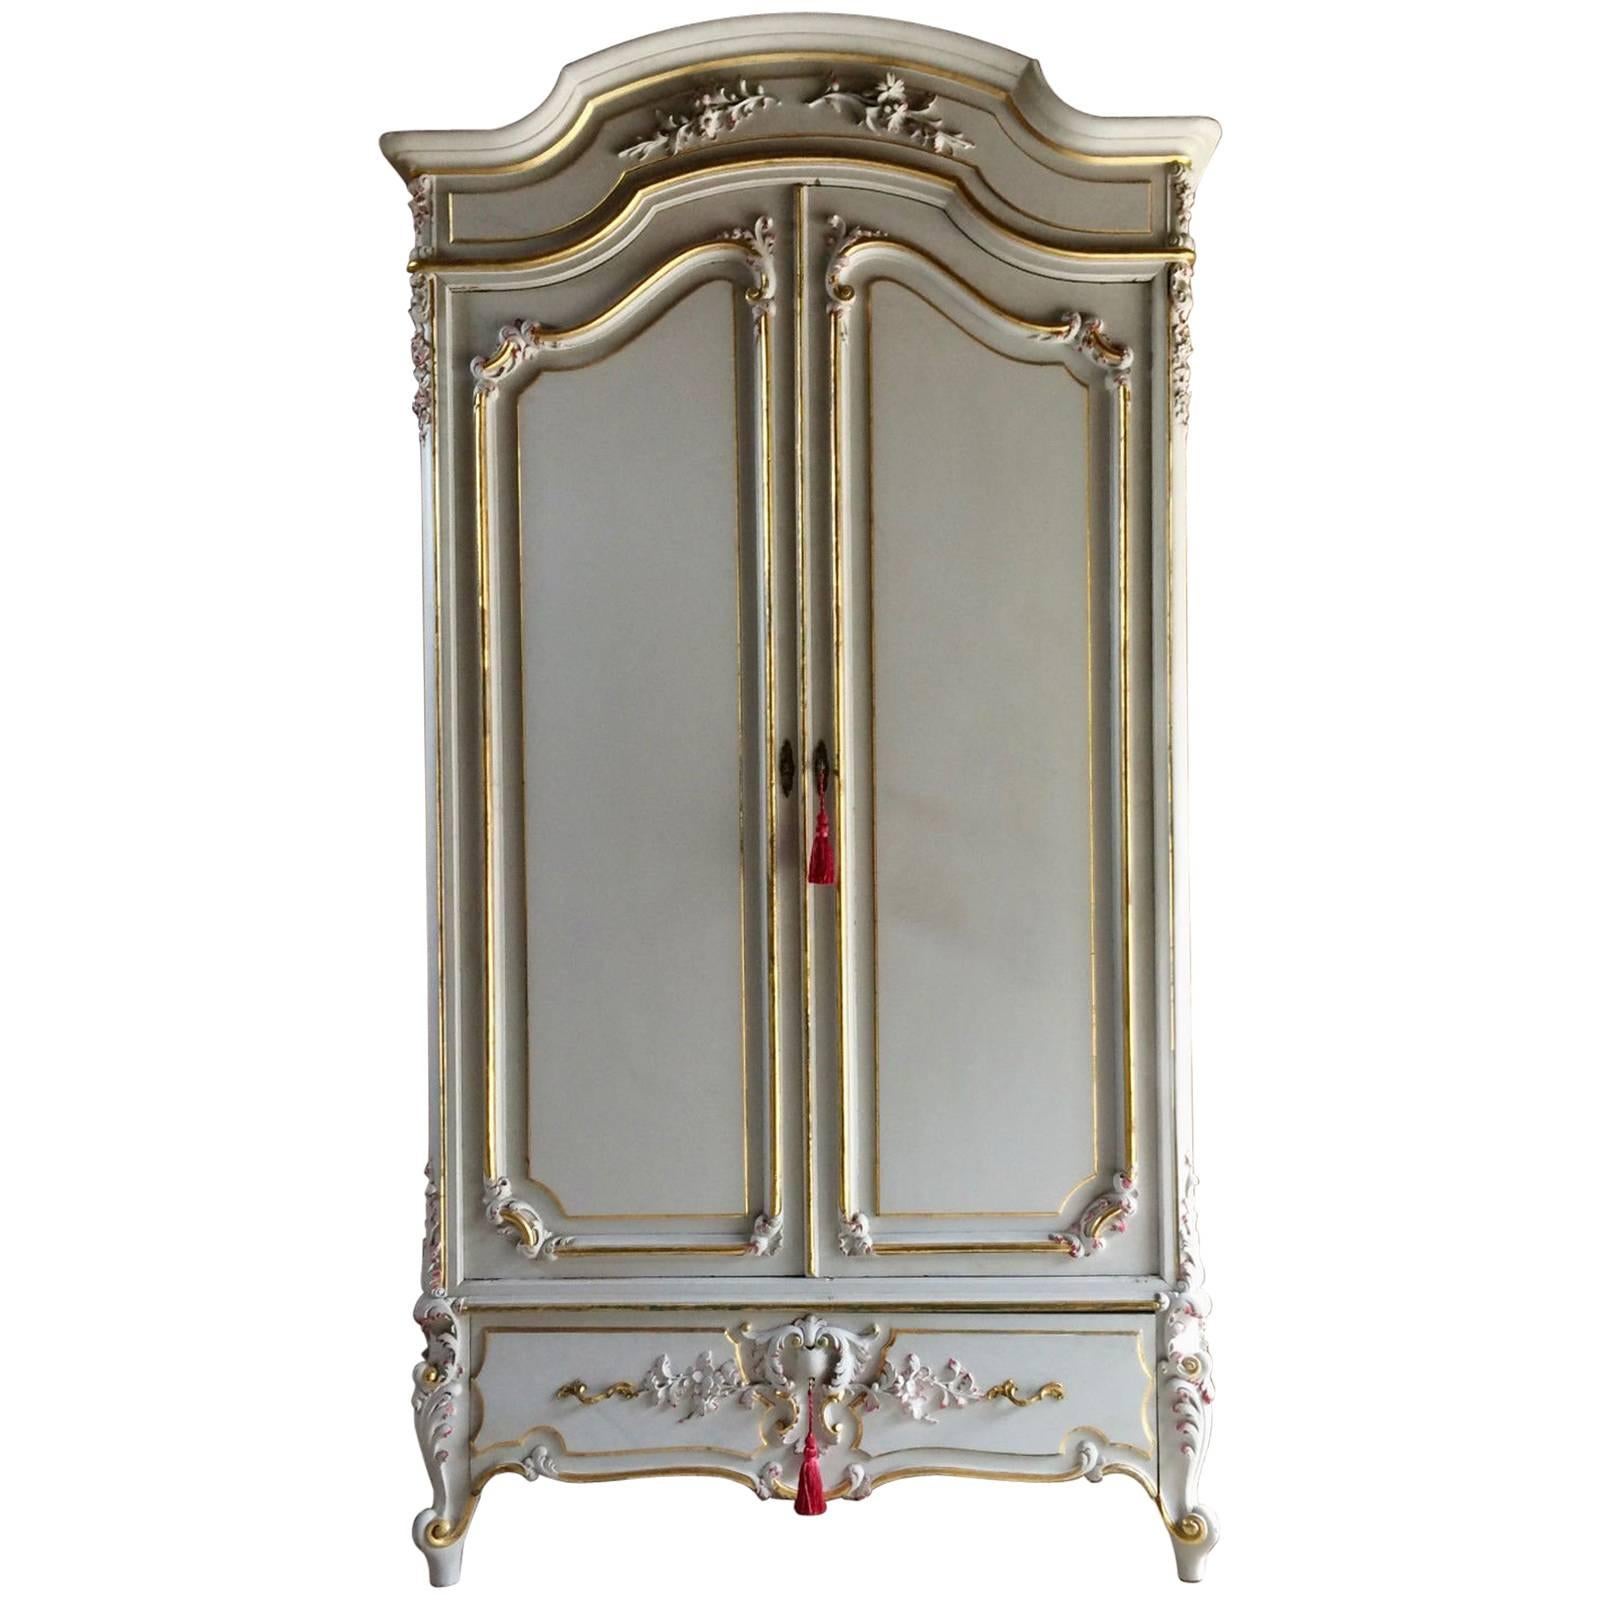 Antique Style French Armoire Wardrobe Painted Gilded Mirrored Large